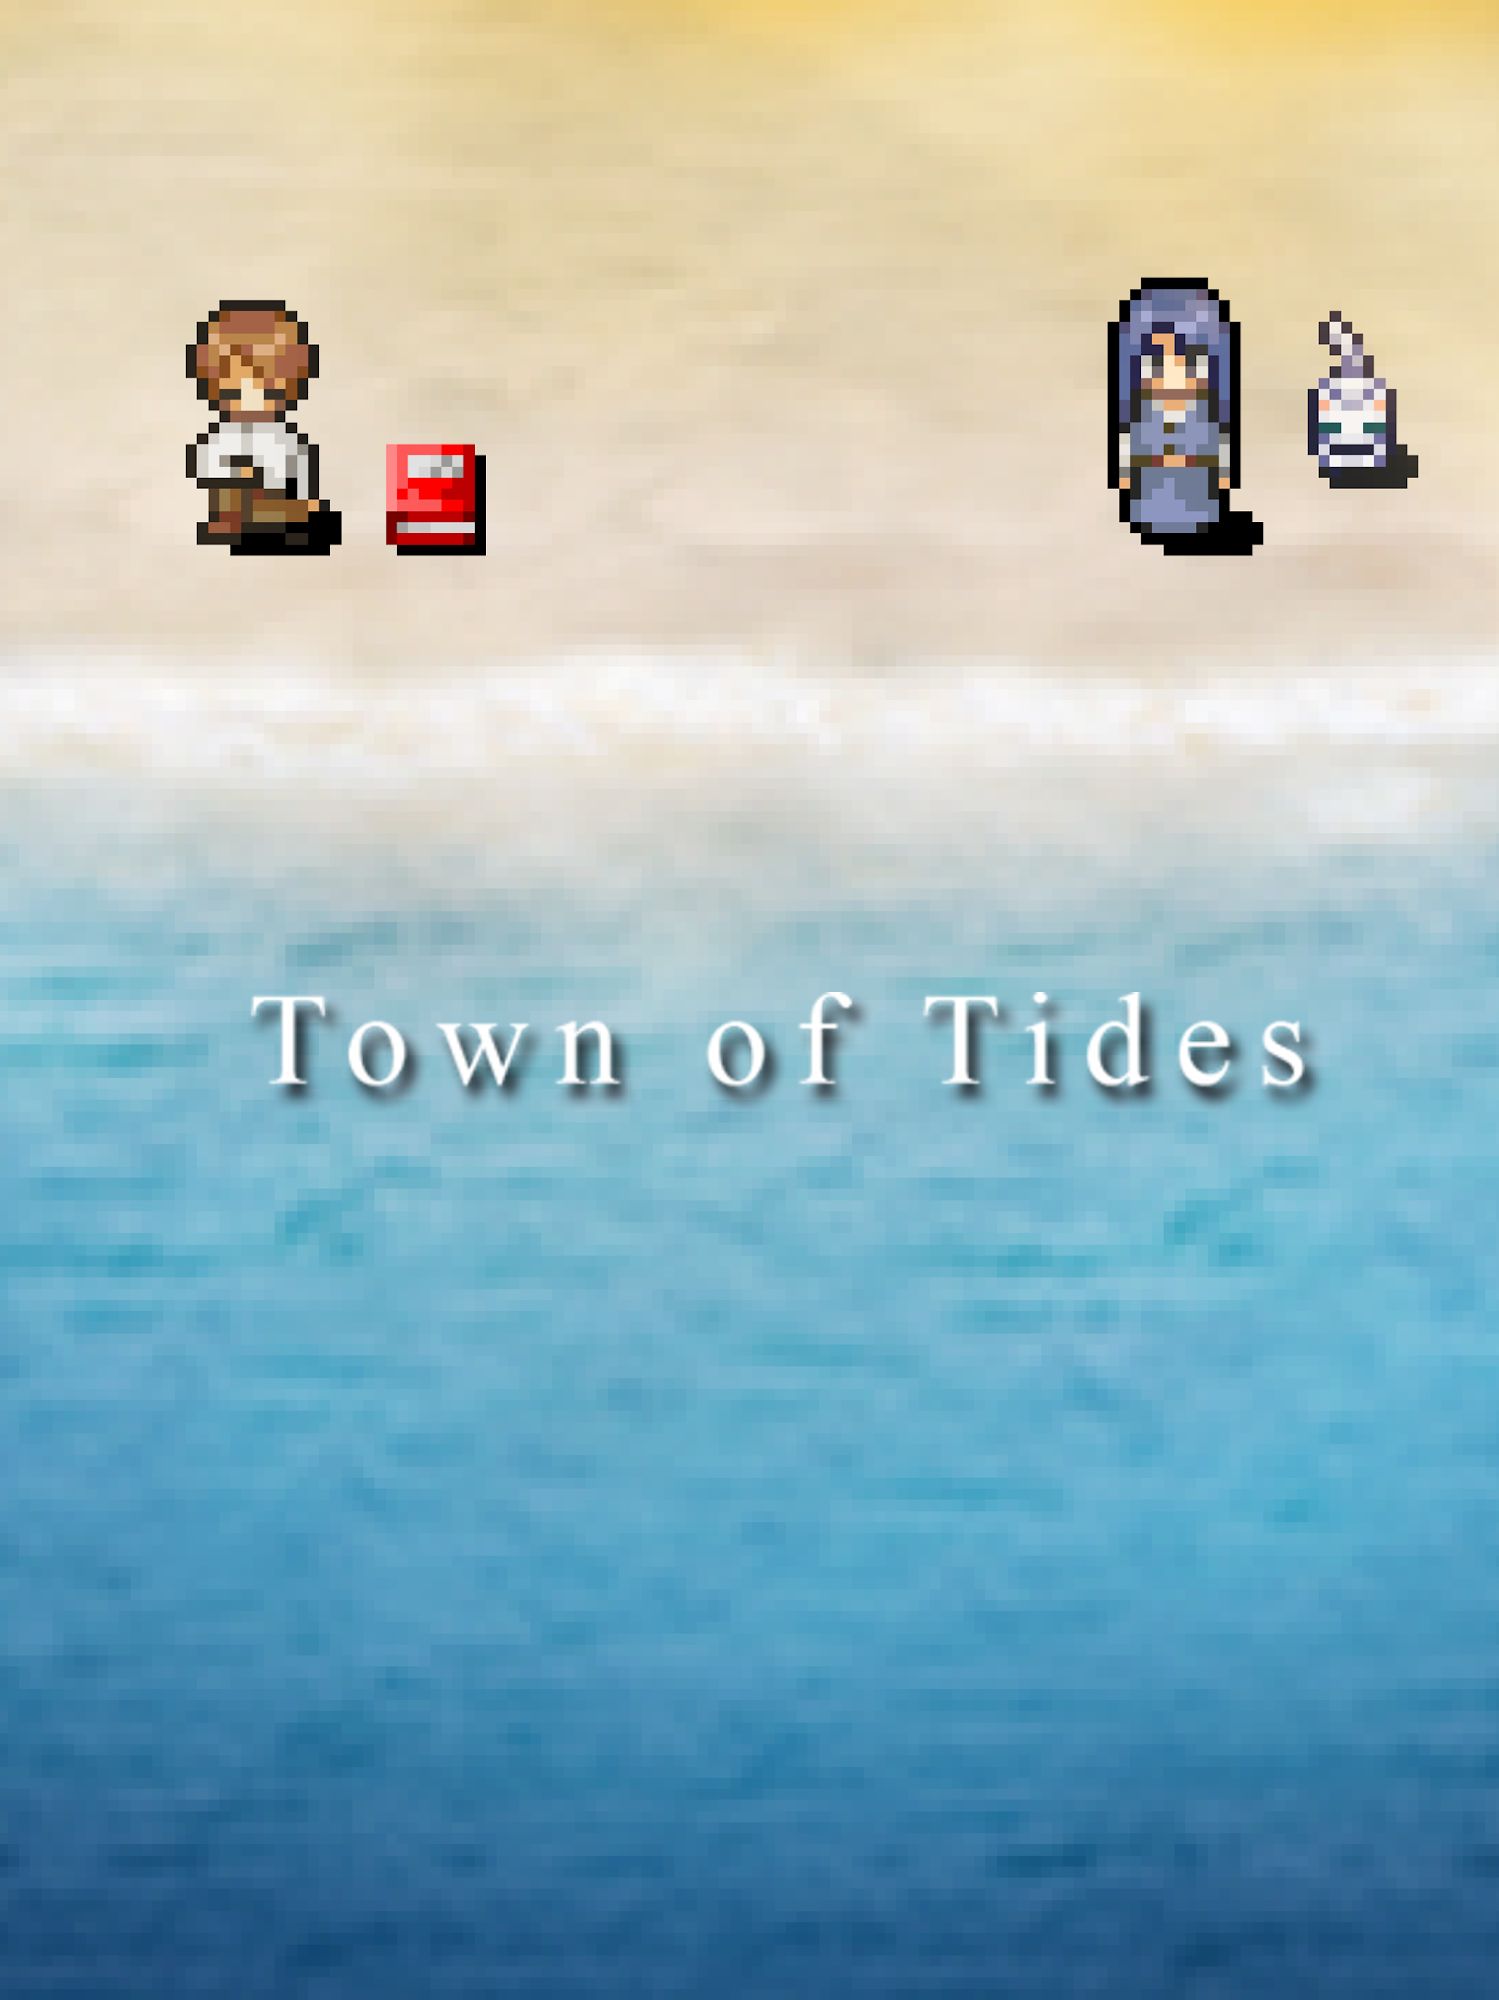 Scarica Town of Tides gratis per Android A.n.d.r.o.i.d. .5...0. .a.n.d. .m.o.r.e.